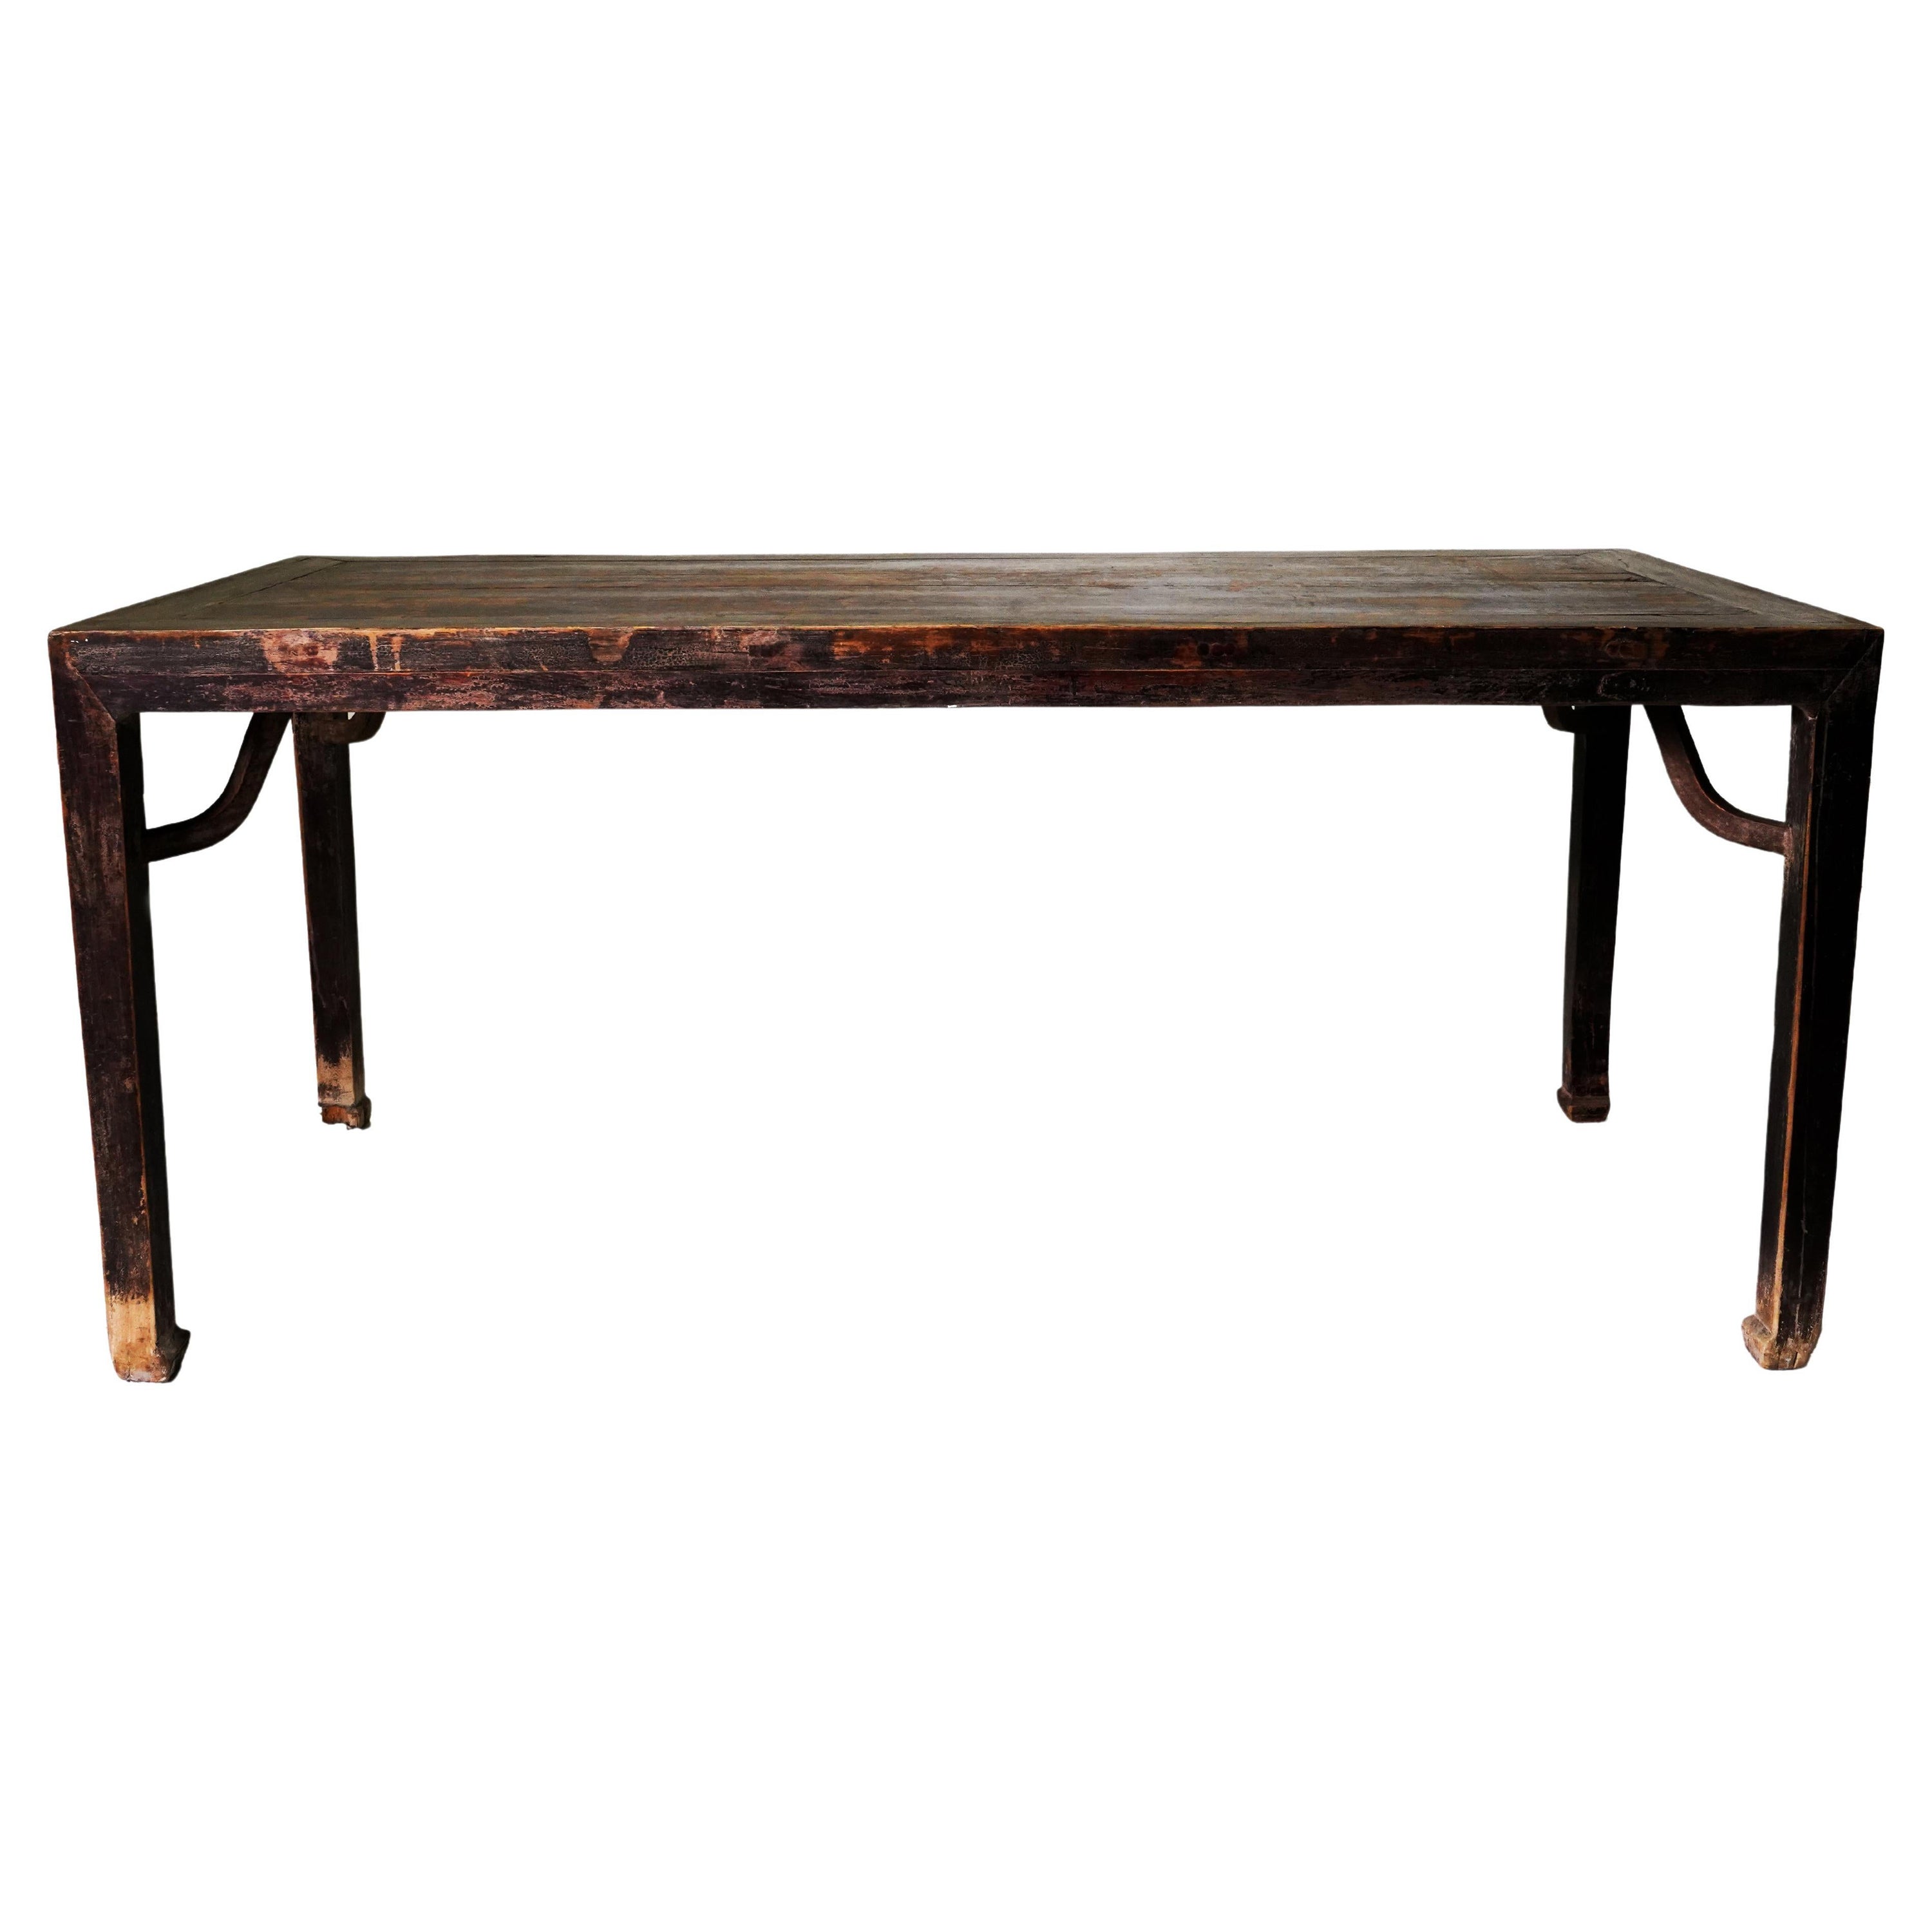 C. 1850 Ming Style Chinese Painting Table with Horse Hoof Legs For Sale